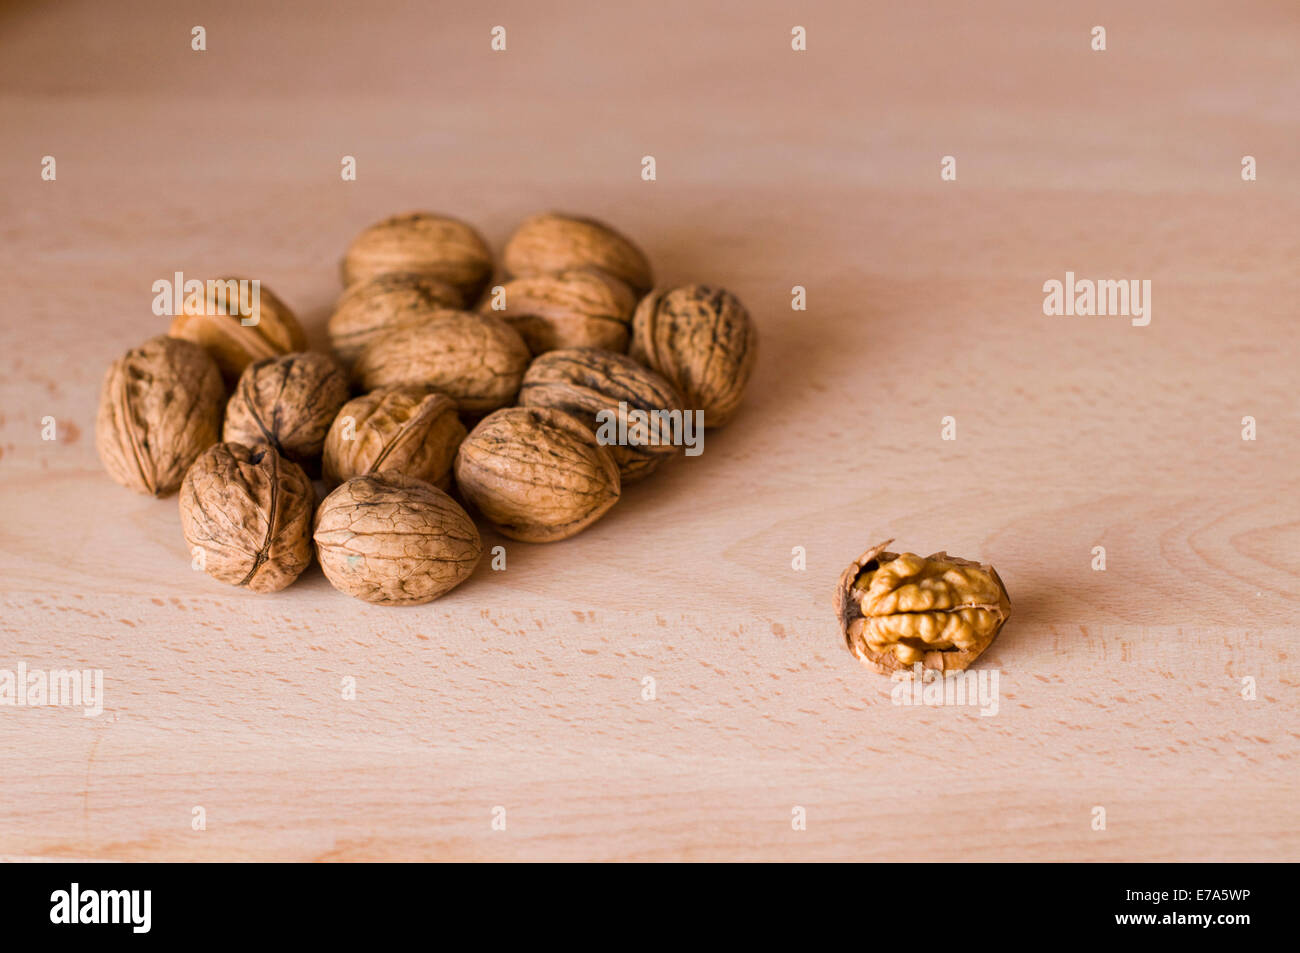 Dried fruit and nuts. Some walnuts over a wood table Stock Photo